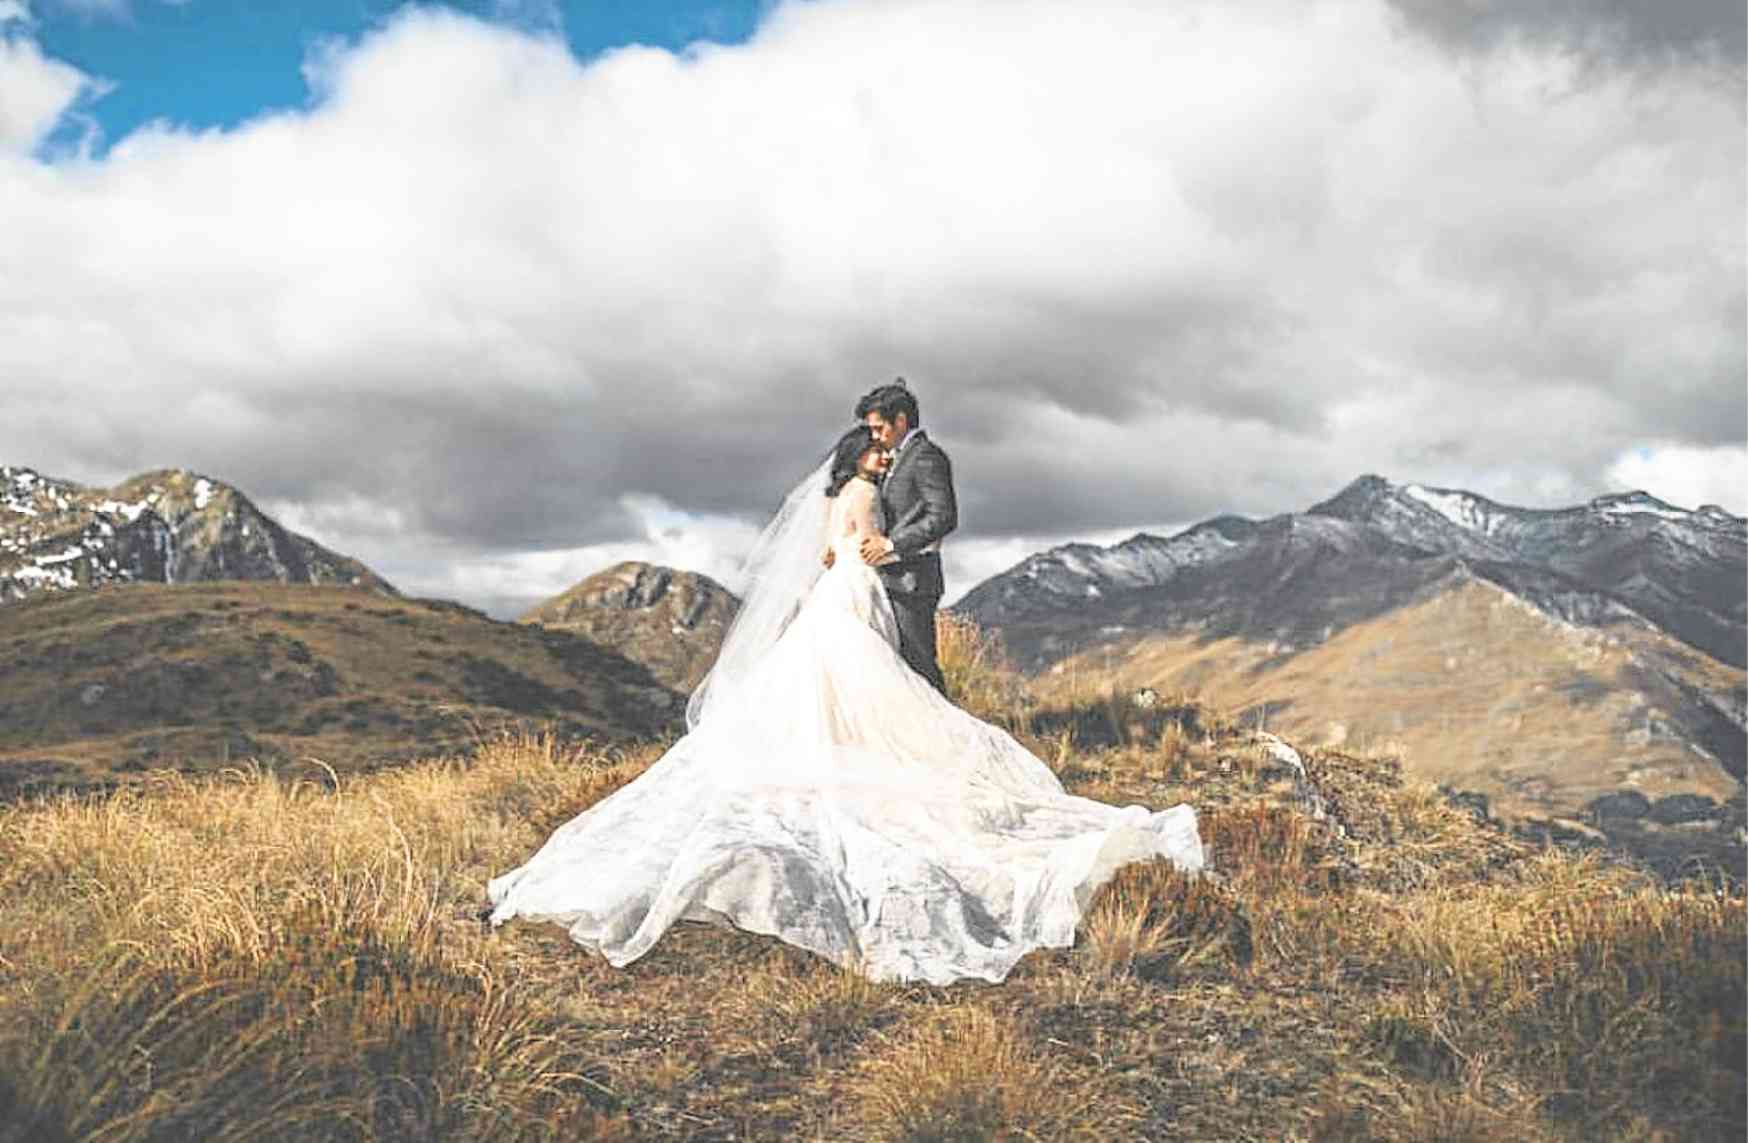 Anne Curtis wore boots: Inside the Heussaffs' stylish and scenic wedding